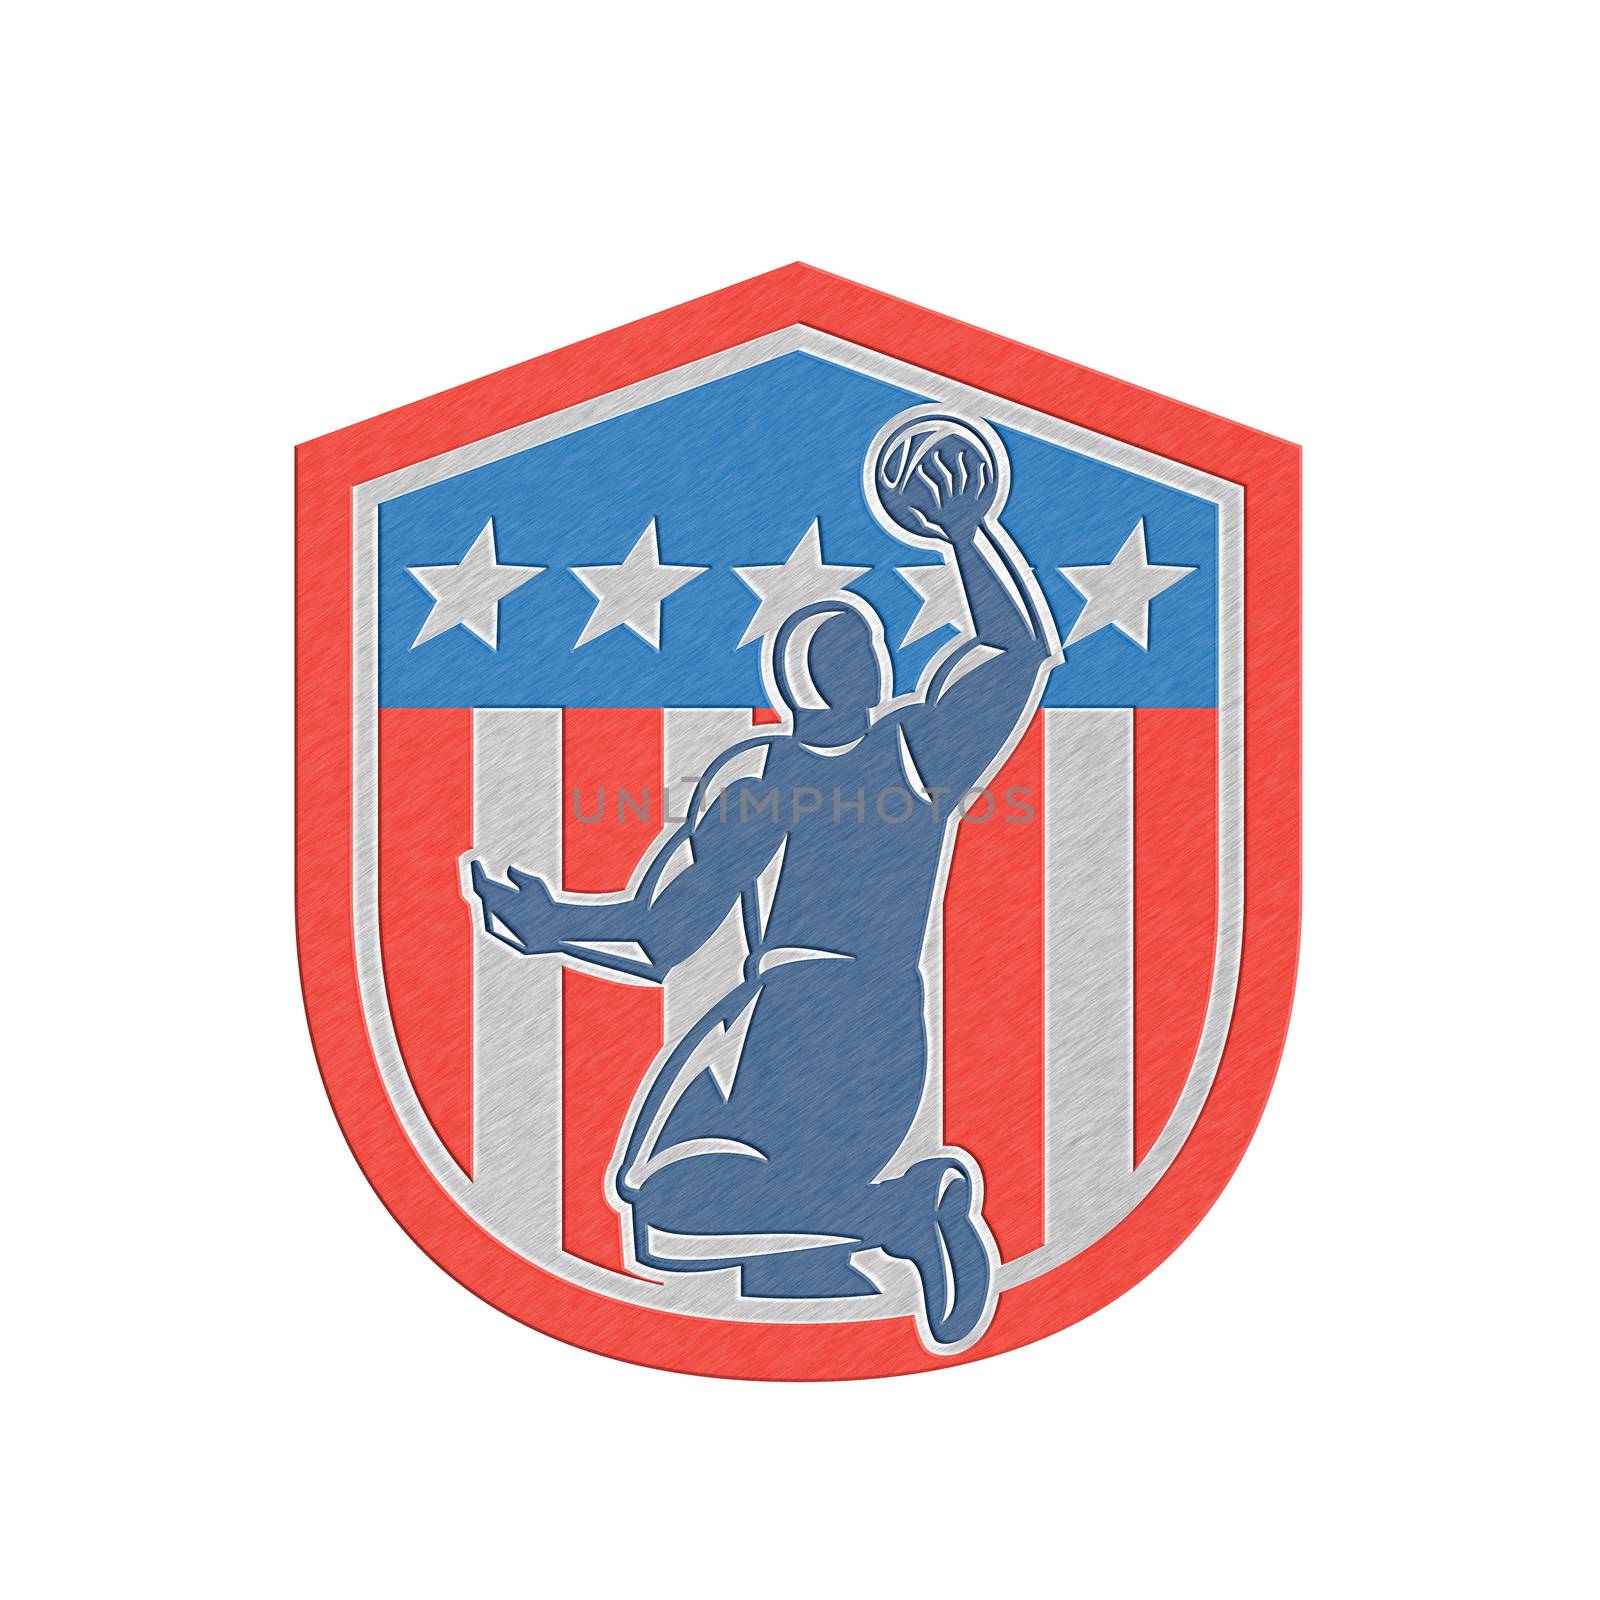 Metallic styled illustration of a basketball player dunking rebounding ball viewed from the rear set inside American stars and stripes flag shield crest done in retro style. 